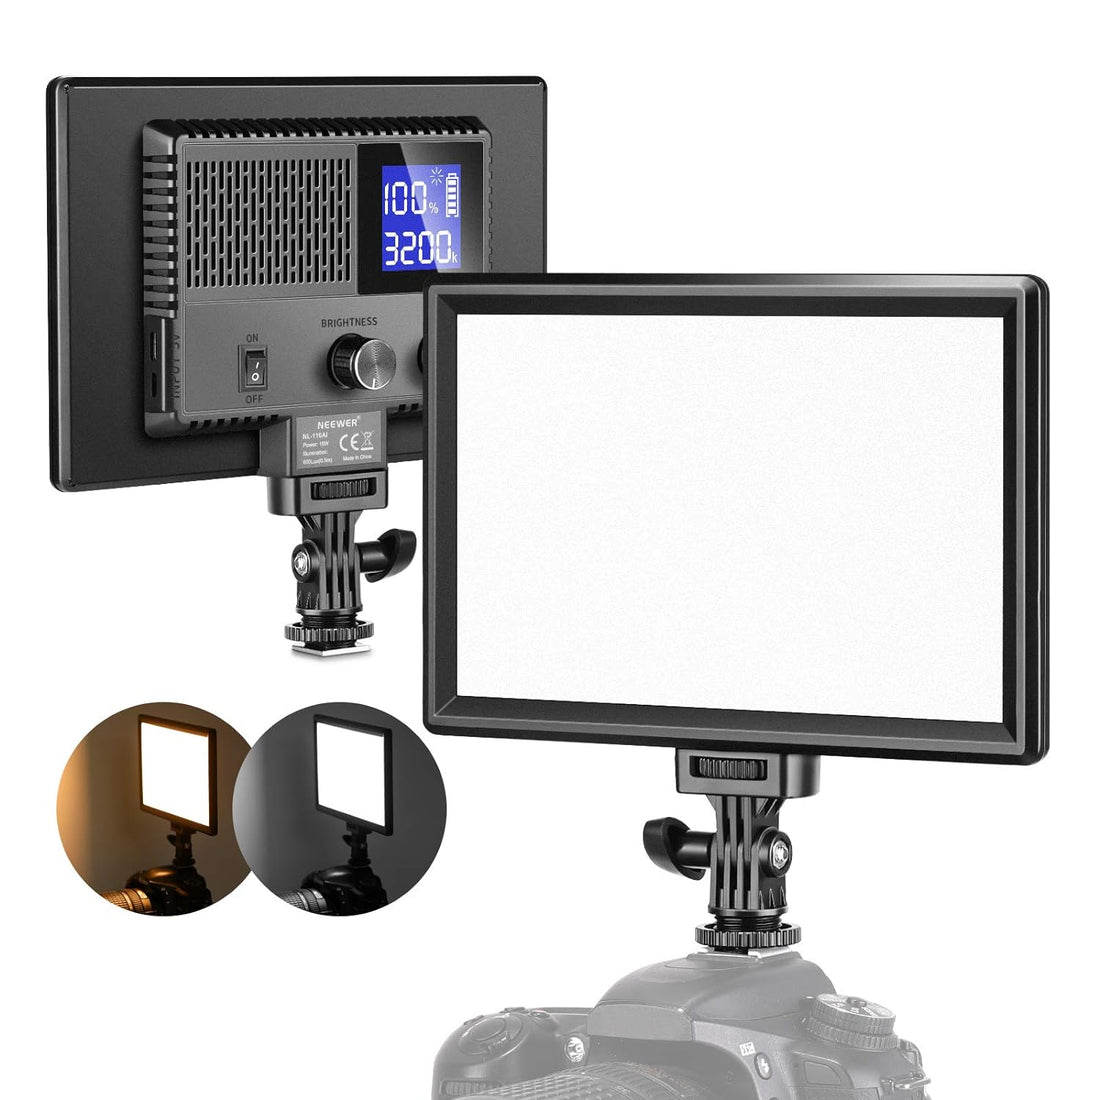 Neewer Ultra-Slim LED Video Soft Light Panel, Dimmable On Camera Video Lighting for DSLR Cameras Photography with LCD Display/3200-5600K/CRI 95+/Built-in Battery for Studio Photo Video Shooting